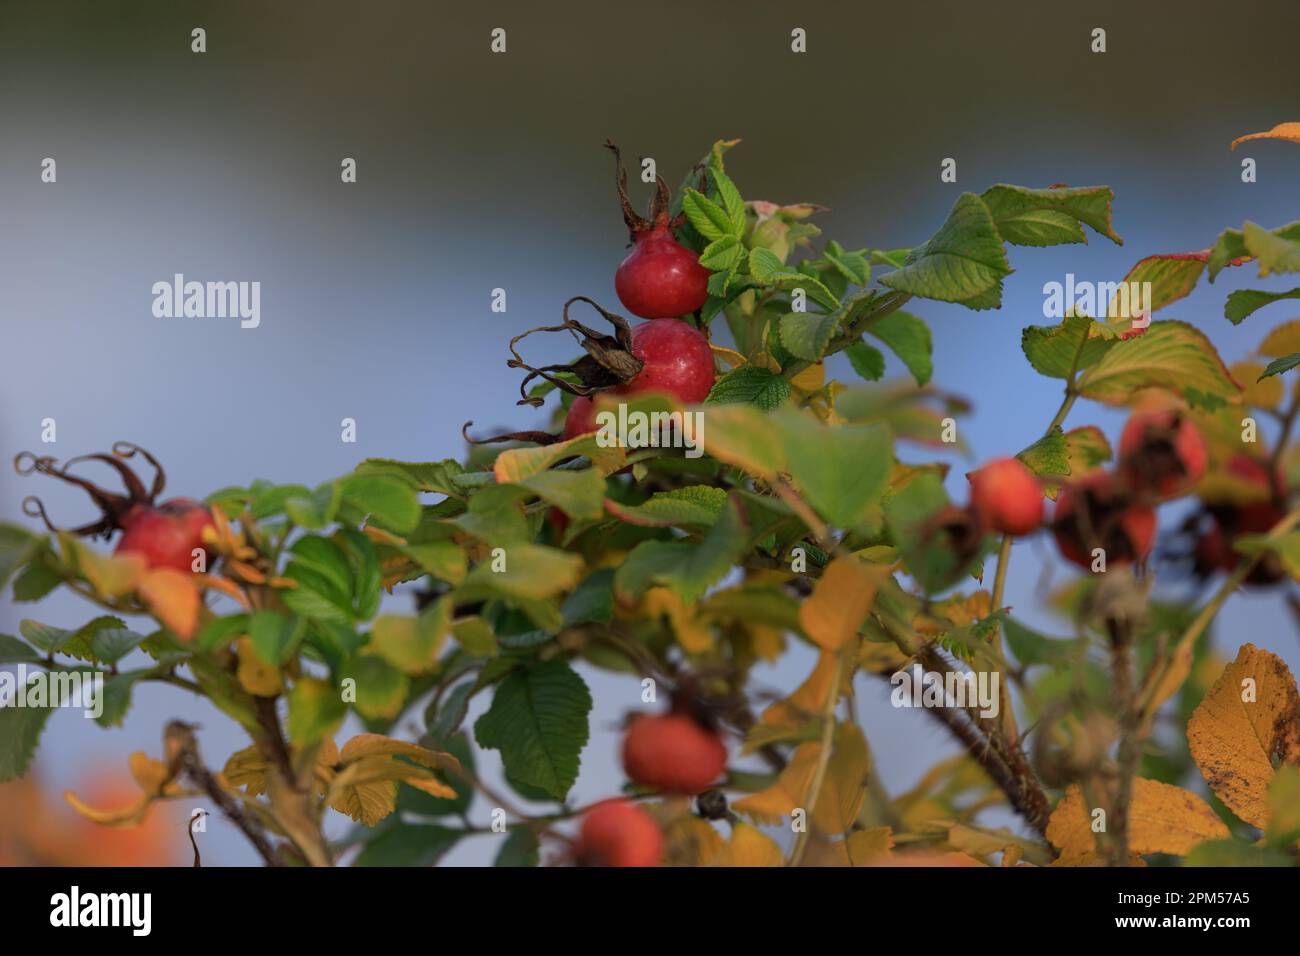 Shrub wild rose hips, leaves and fruits on the branches Stock Photo